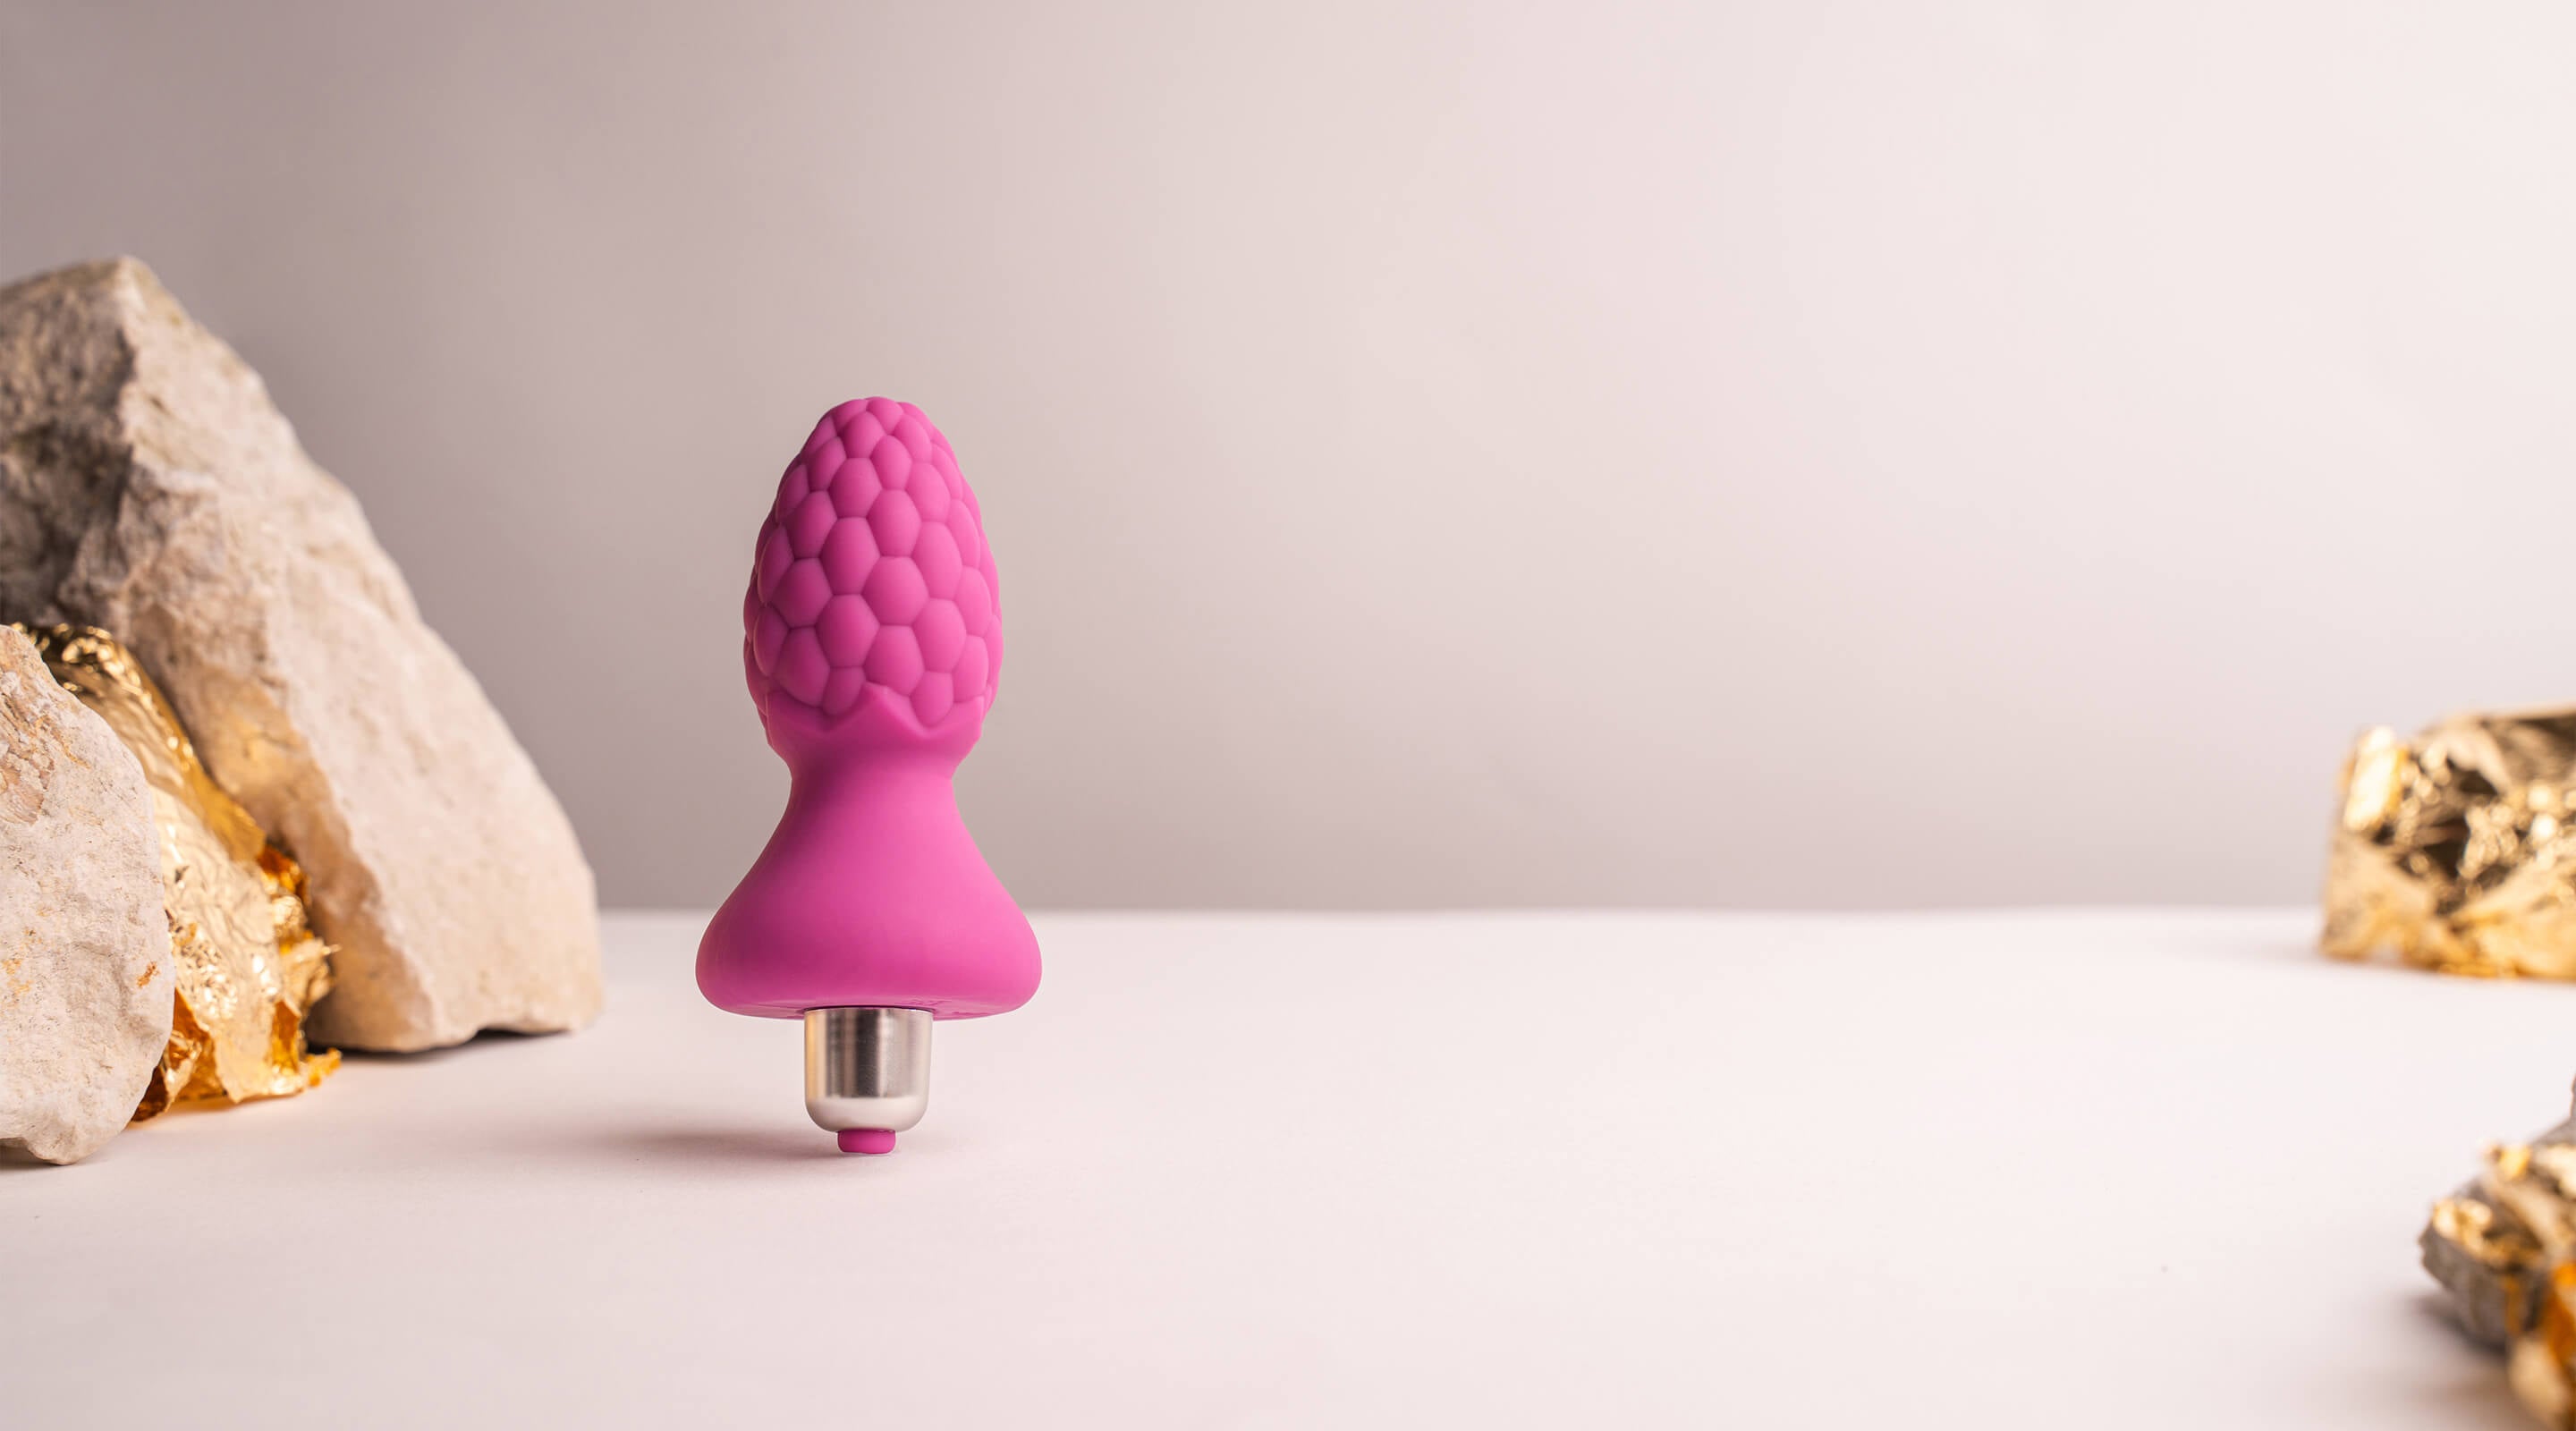 Pink butt plug with raspberry pattern texture housing a removeable bullet vibrator.